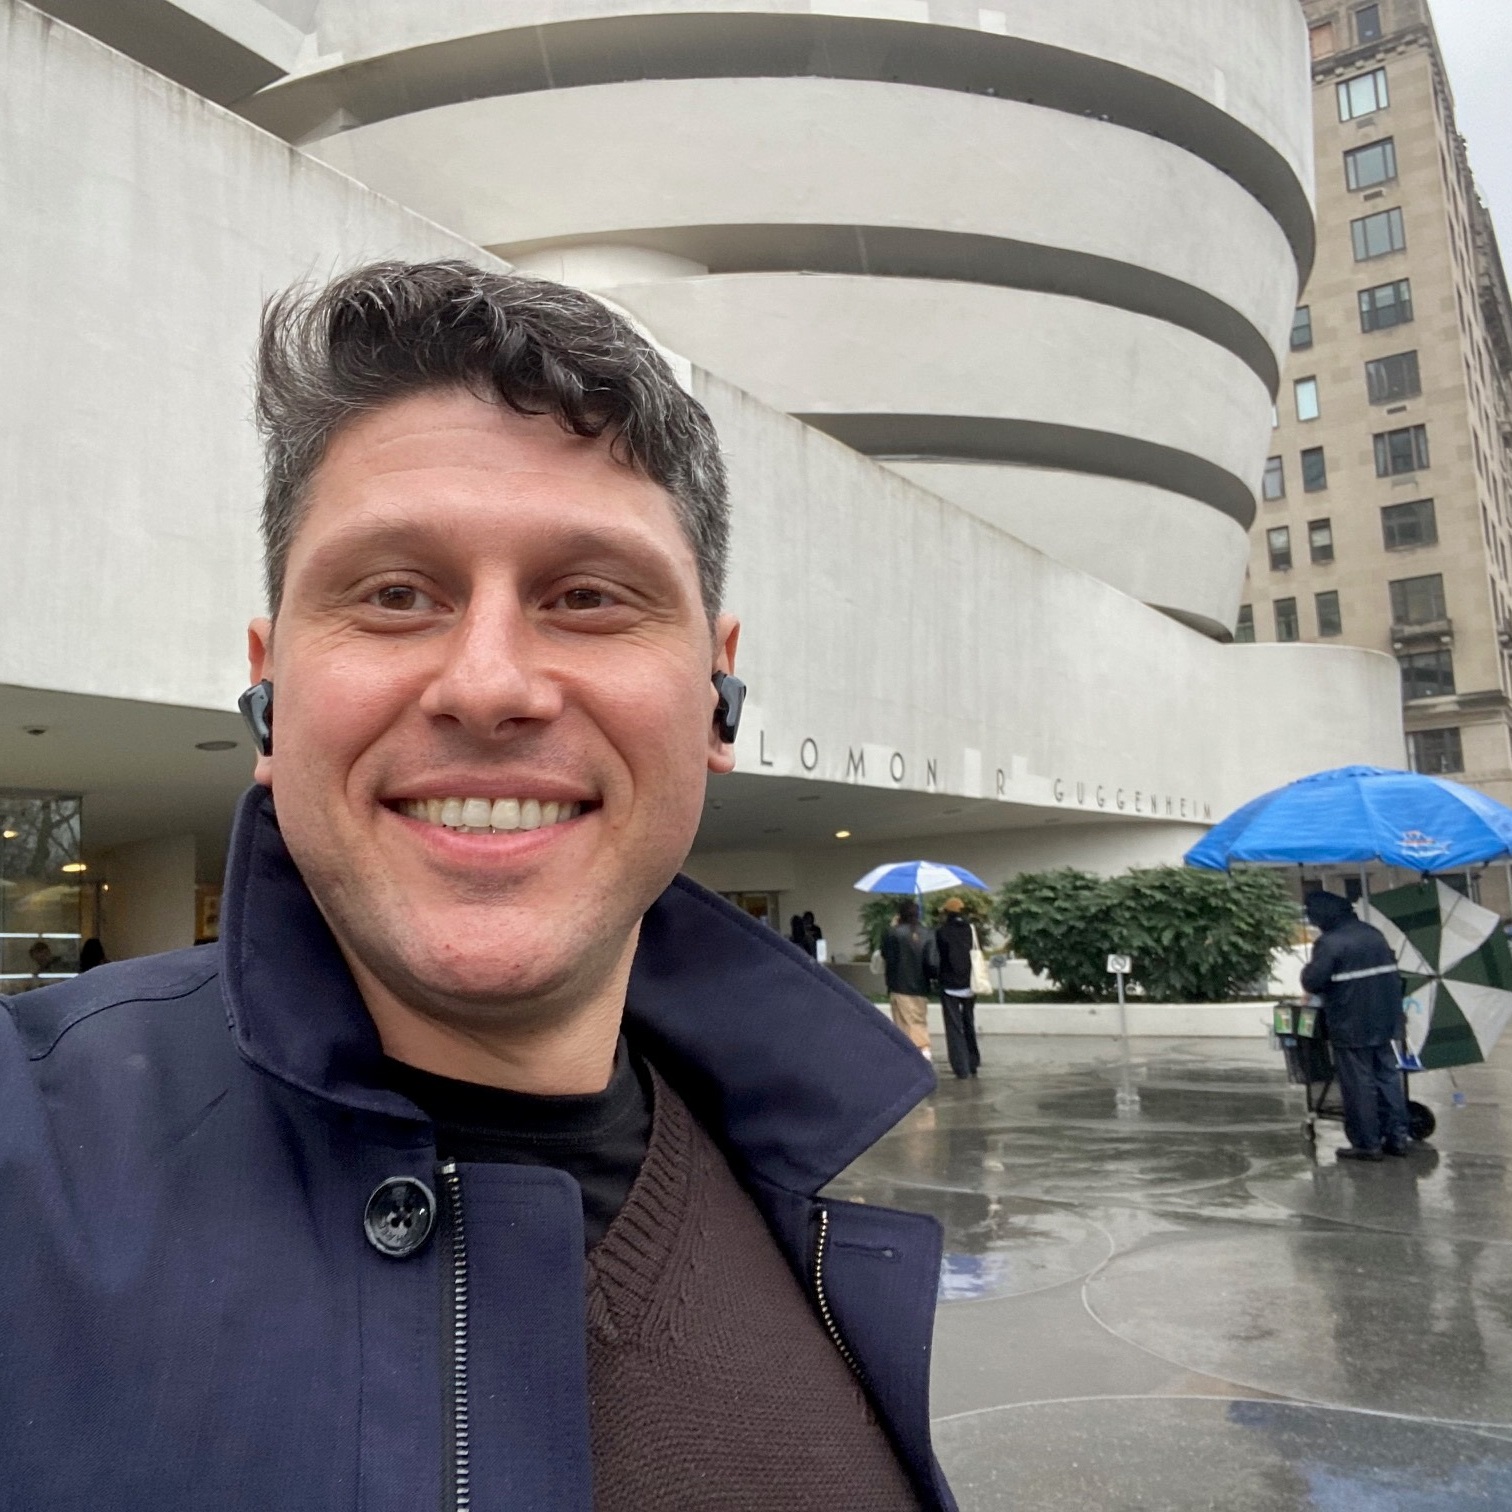 Fine Art Shippers Visited the Solomon R. Guggenheim Museum in NYC